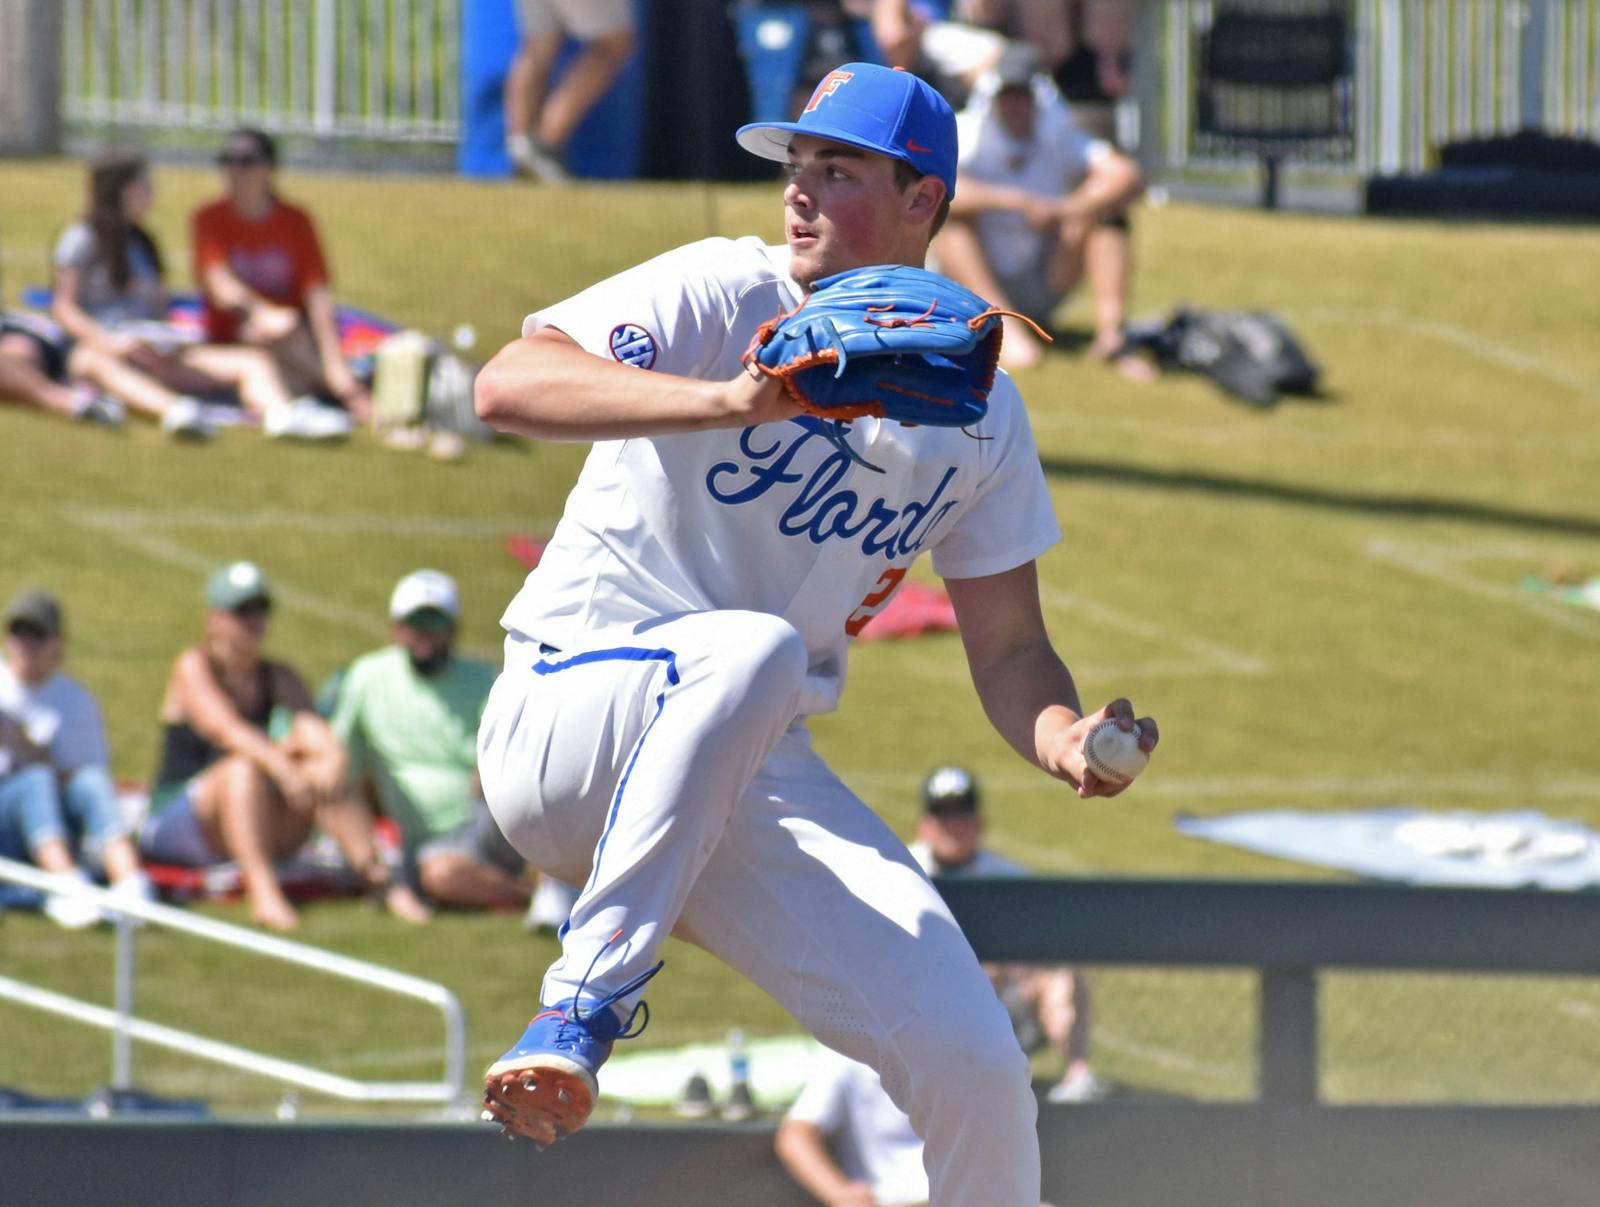 Gators hit the road for the first series outside the SEC against South Carolina